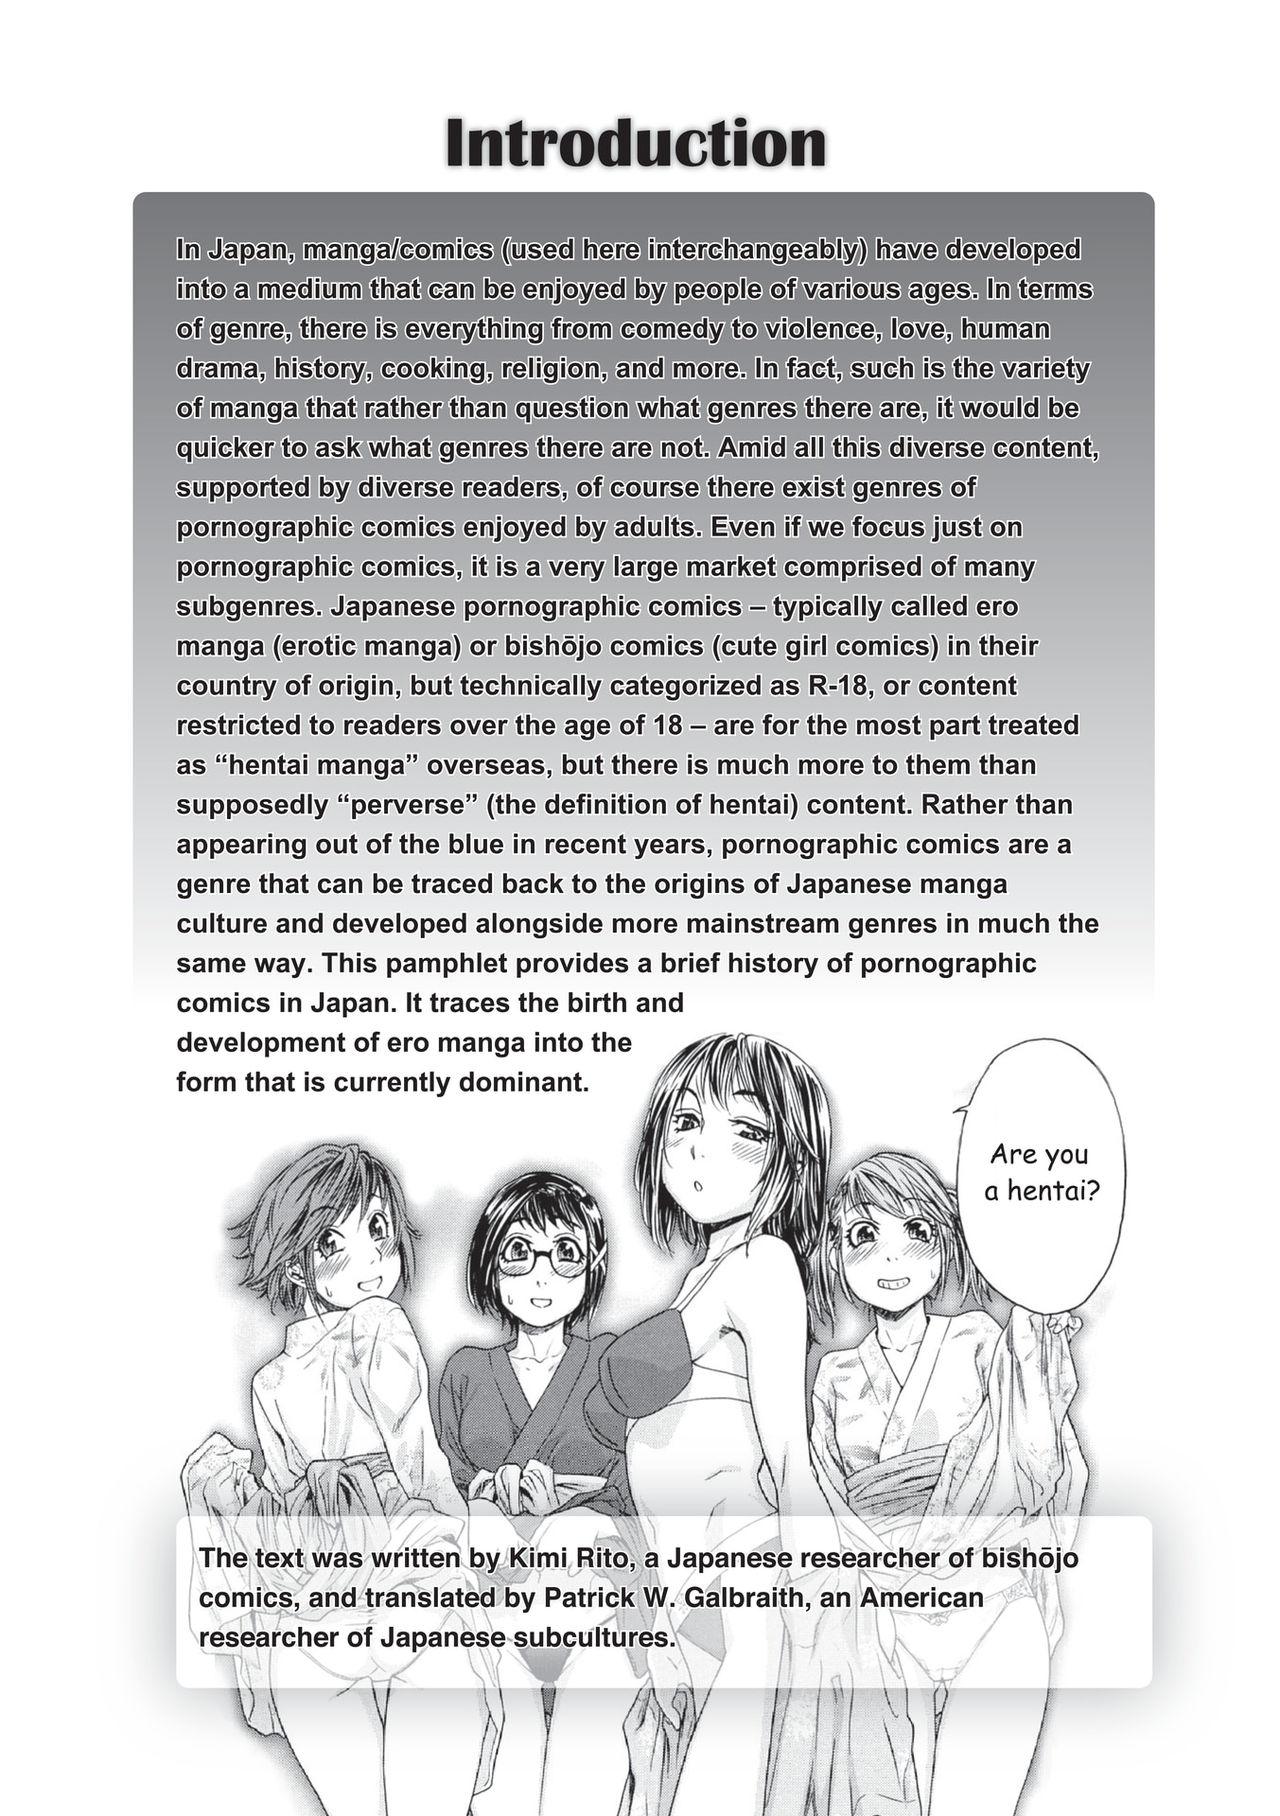 Crazy Hentai Manga! A Brief History of Pornographic Comics in Japan Friend - Page 2